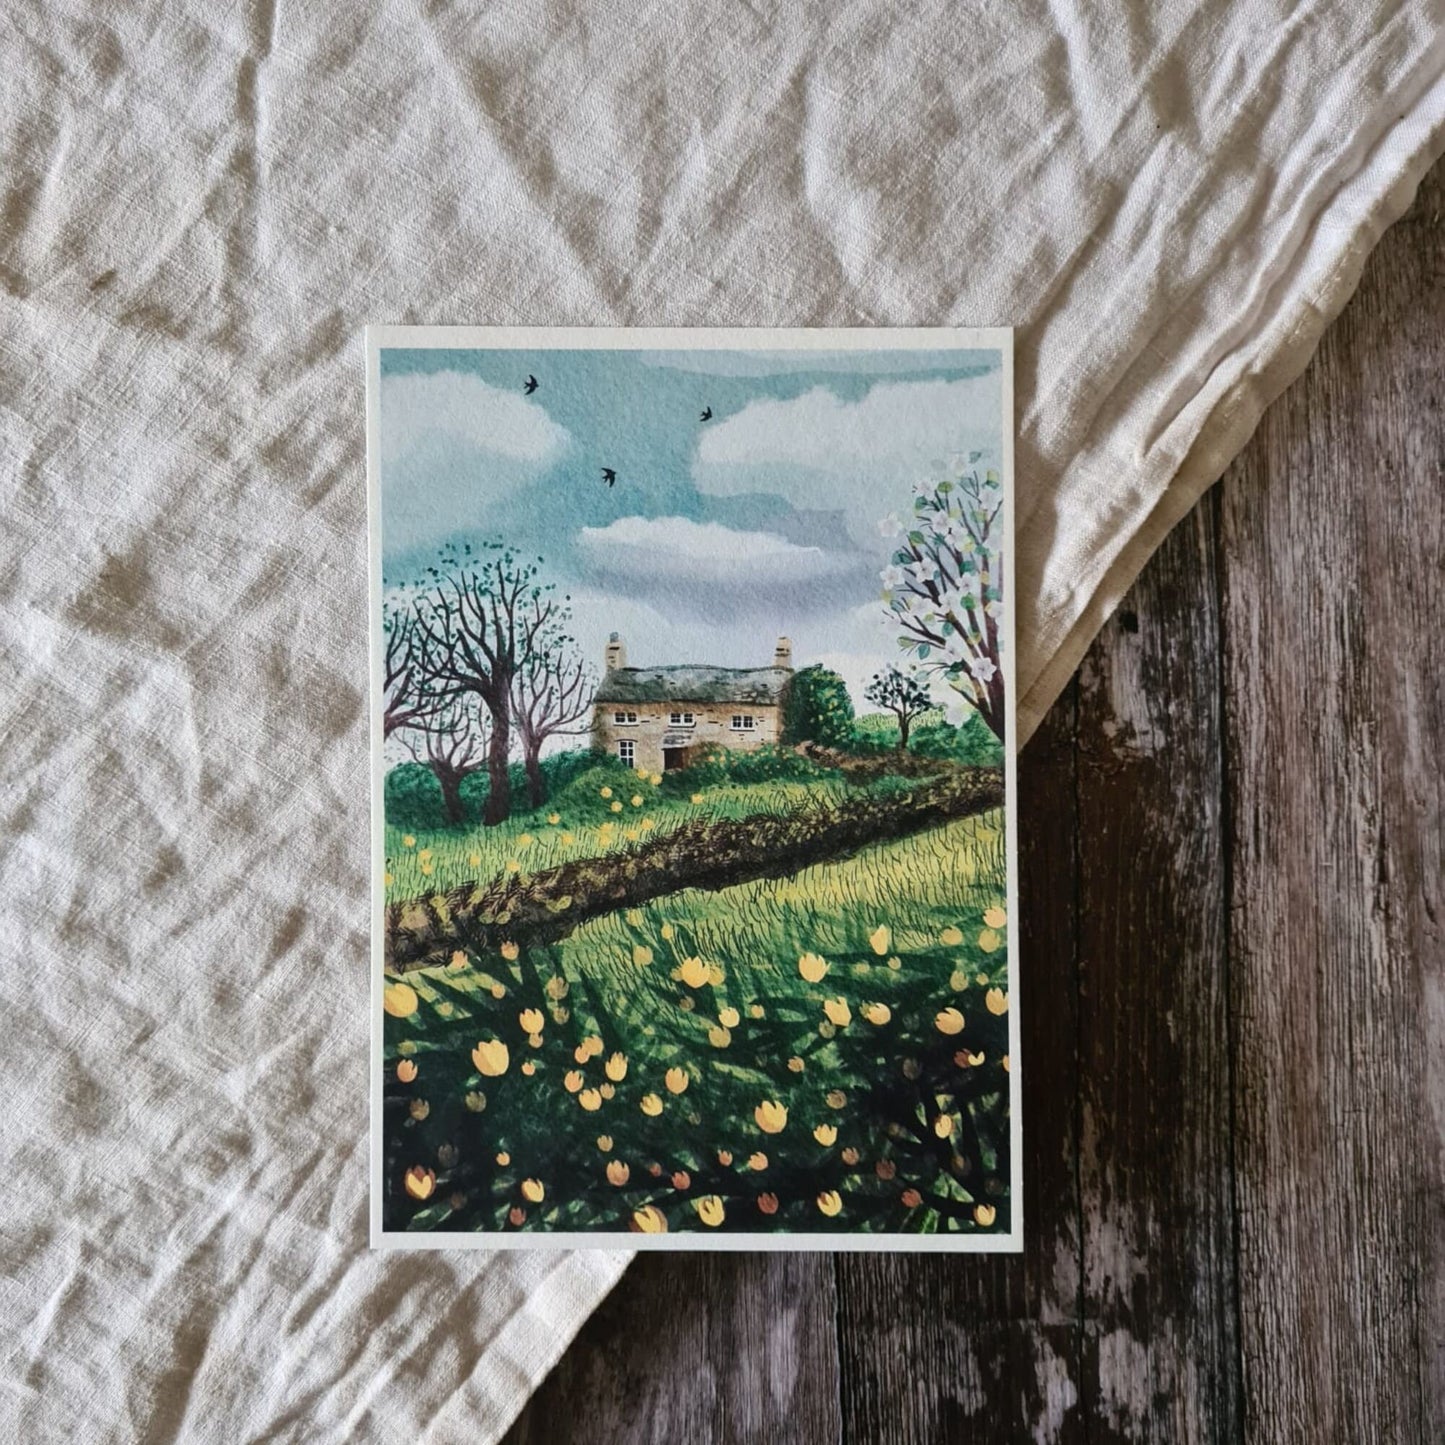 Cosy art print of a traditional Cornish country cottage in the English countryside, whimsical spring art, A4 or A5 size wall art